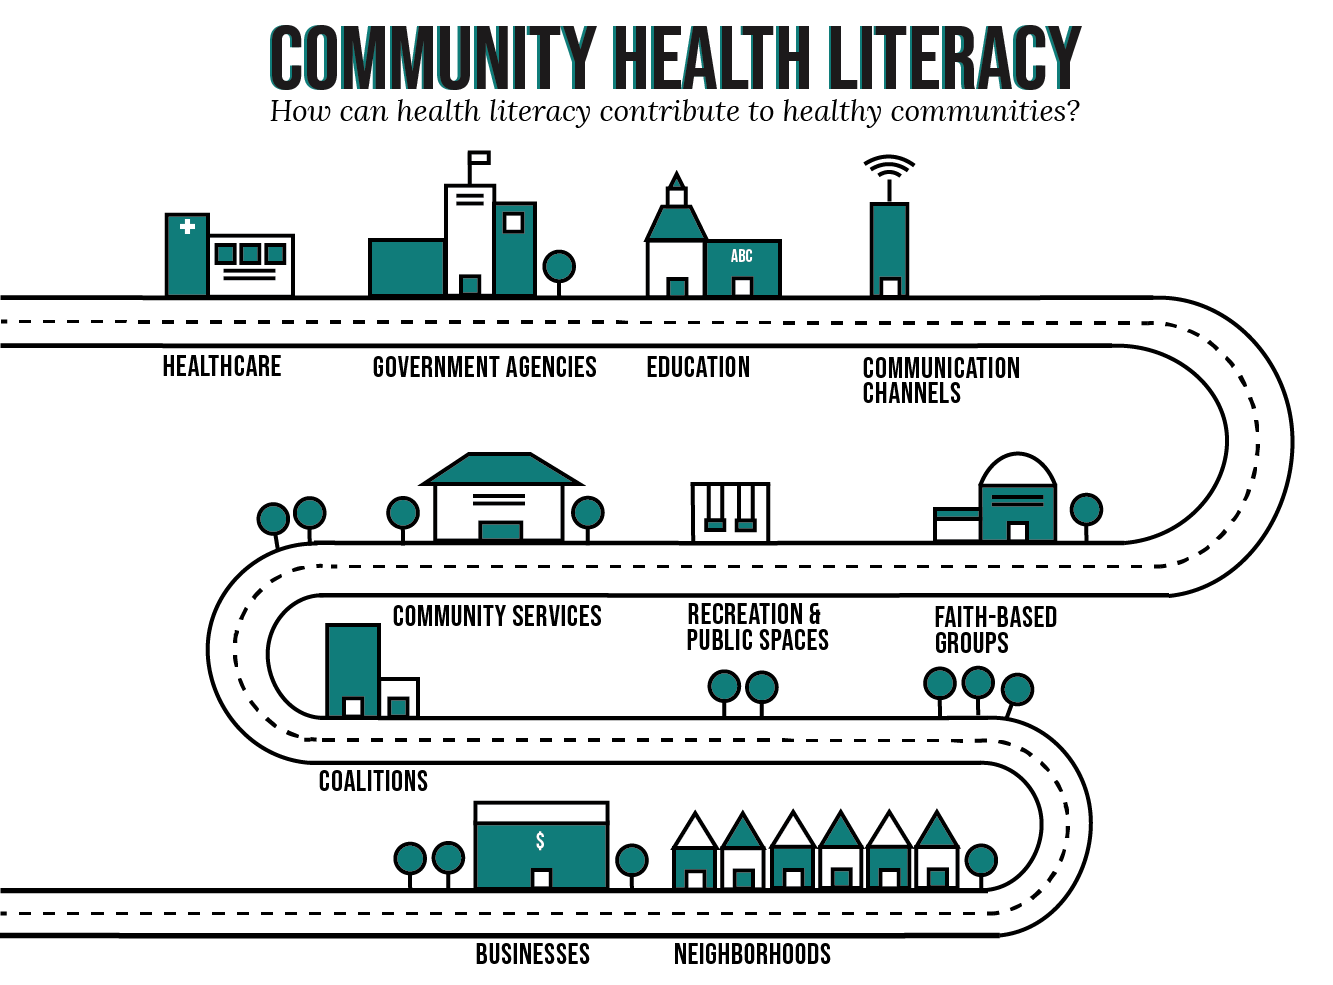 Graphic of Community Health Literacy from the University of Maryland 